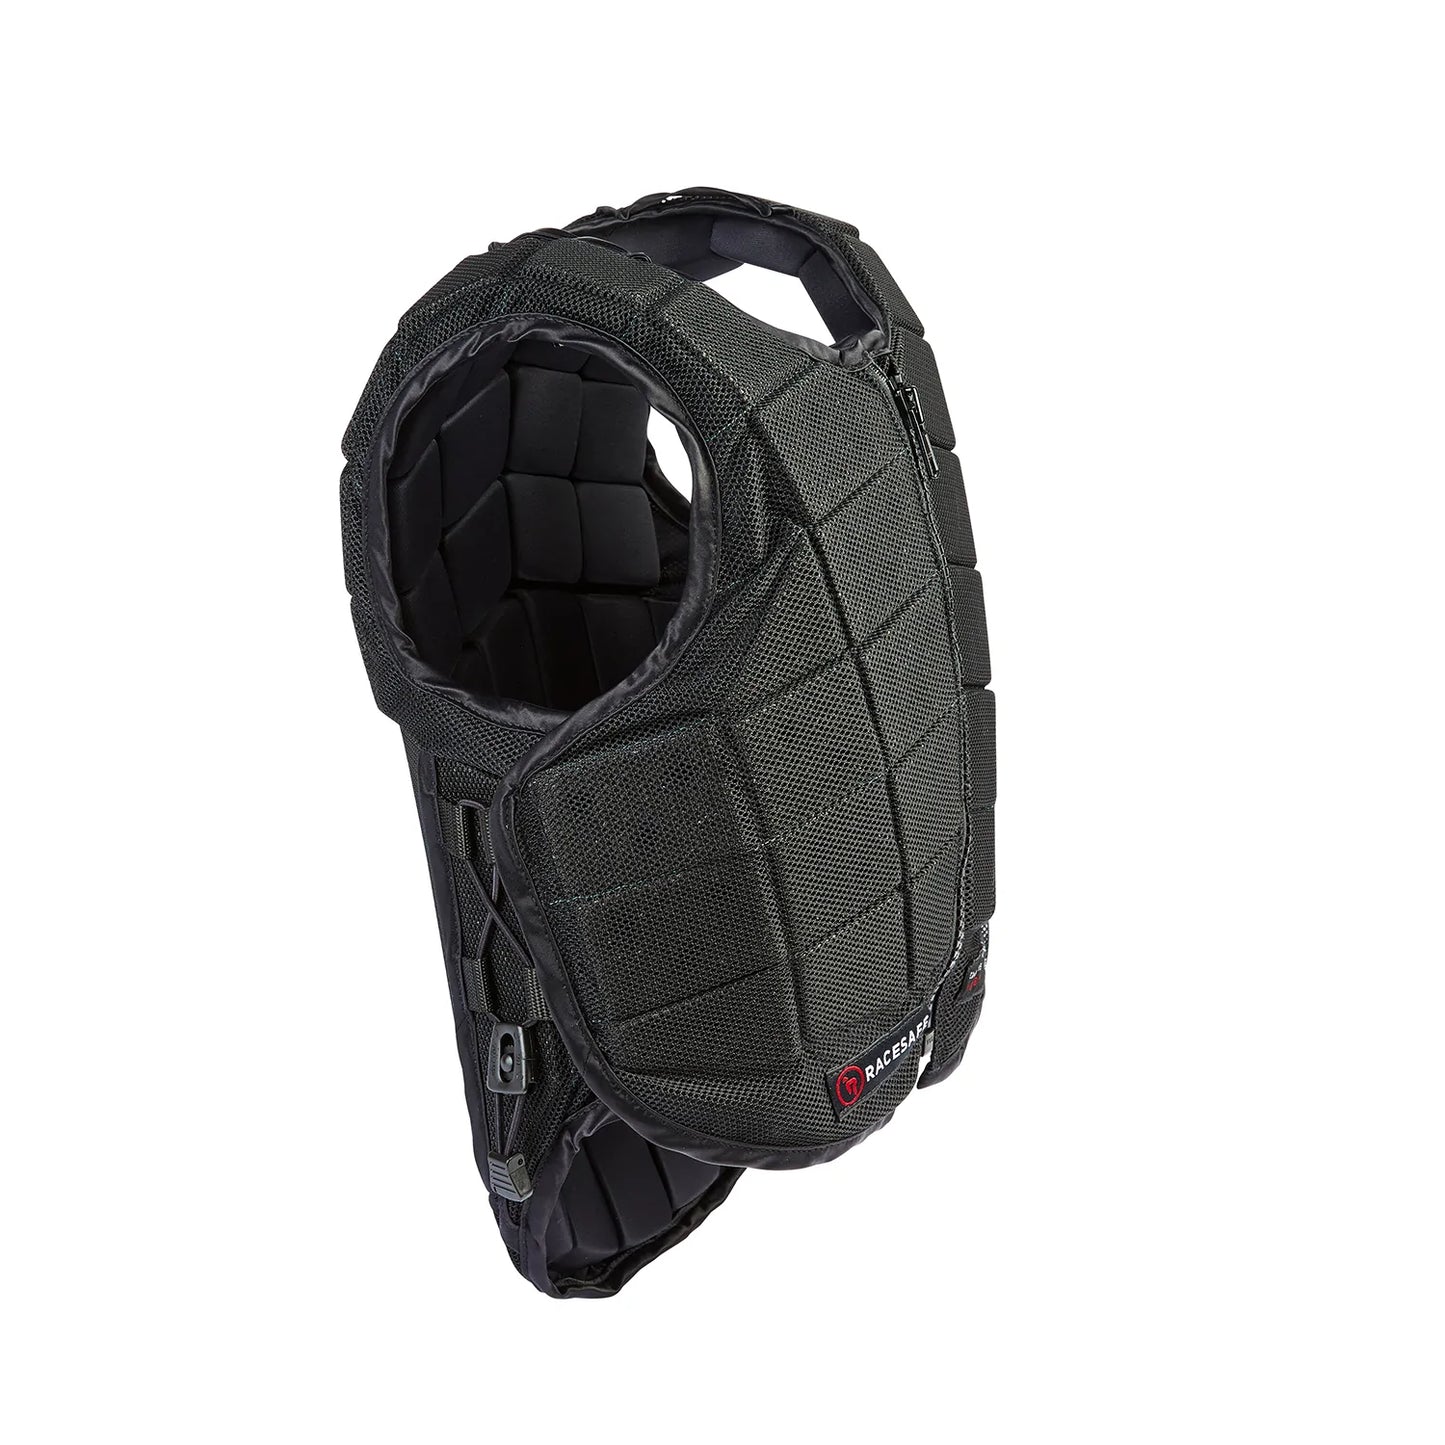 Racesafe Provent 3.0 Childs Body Protector